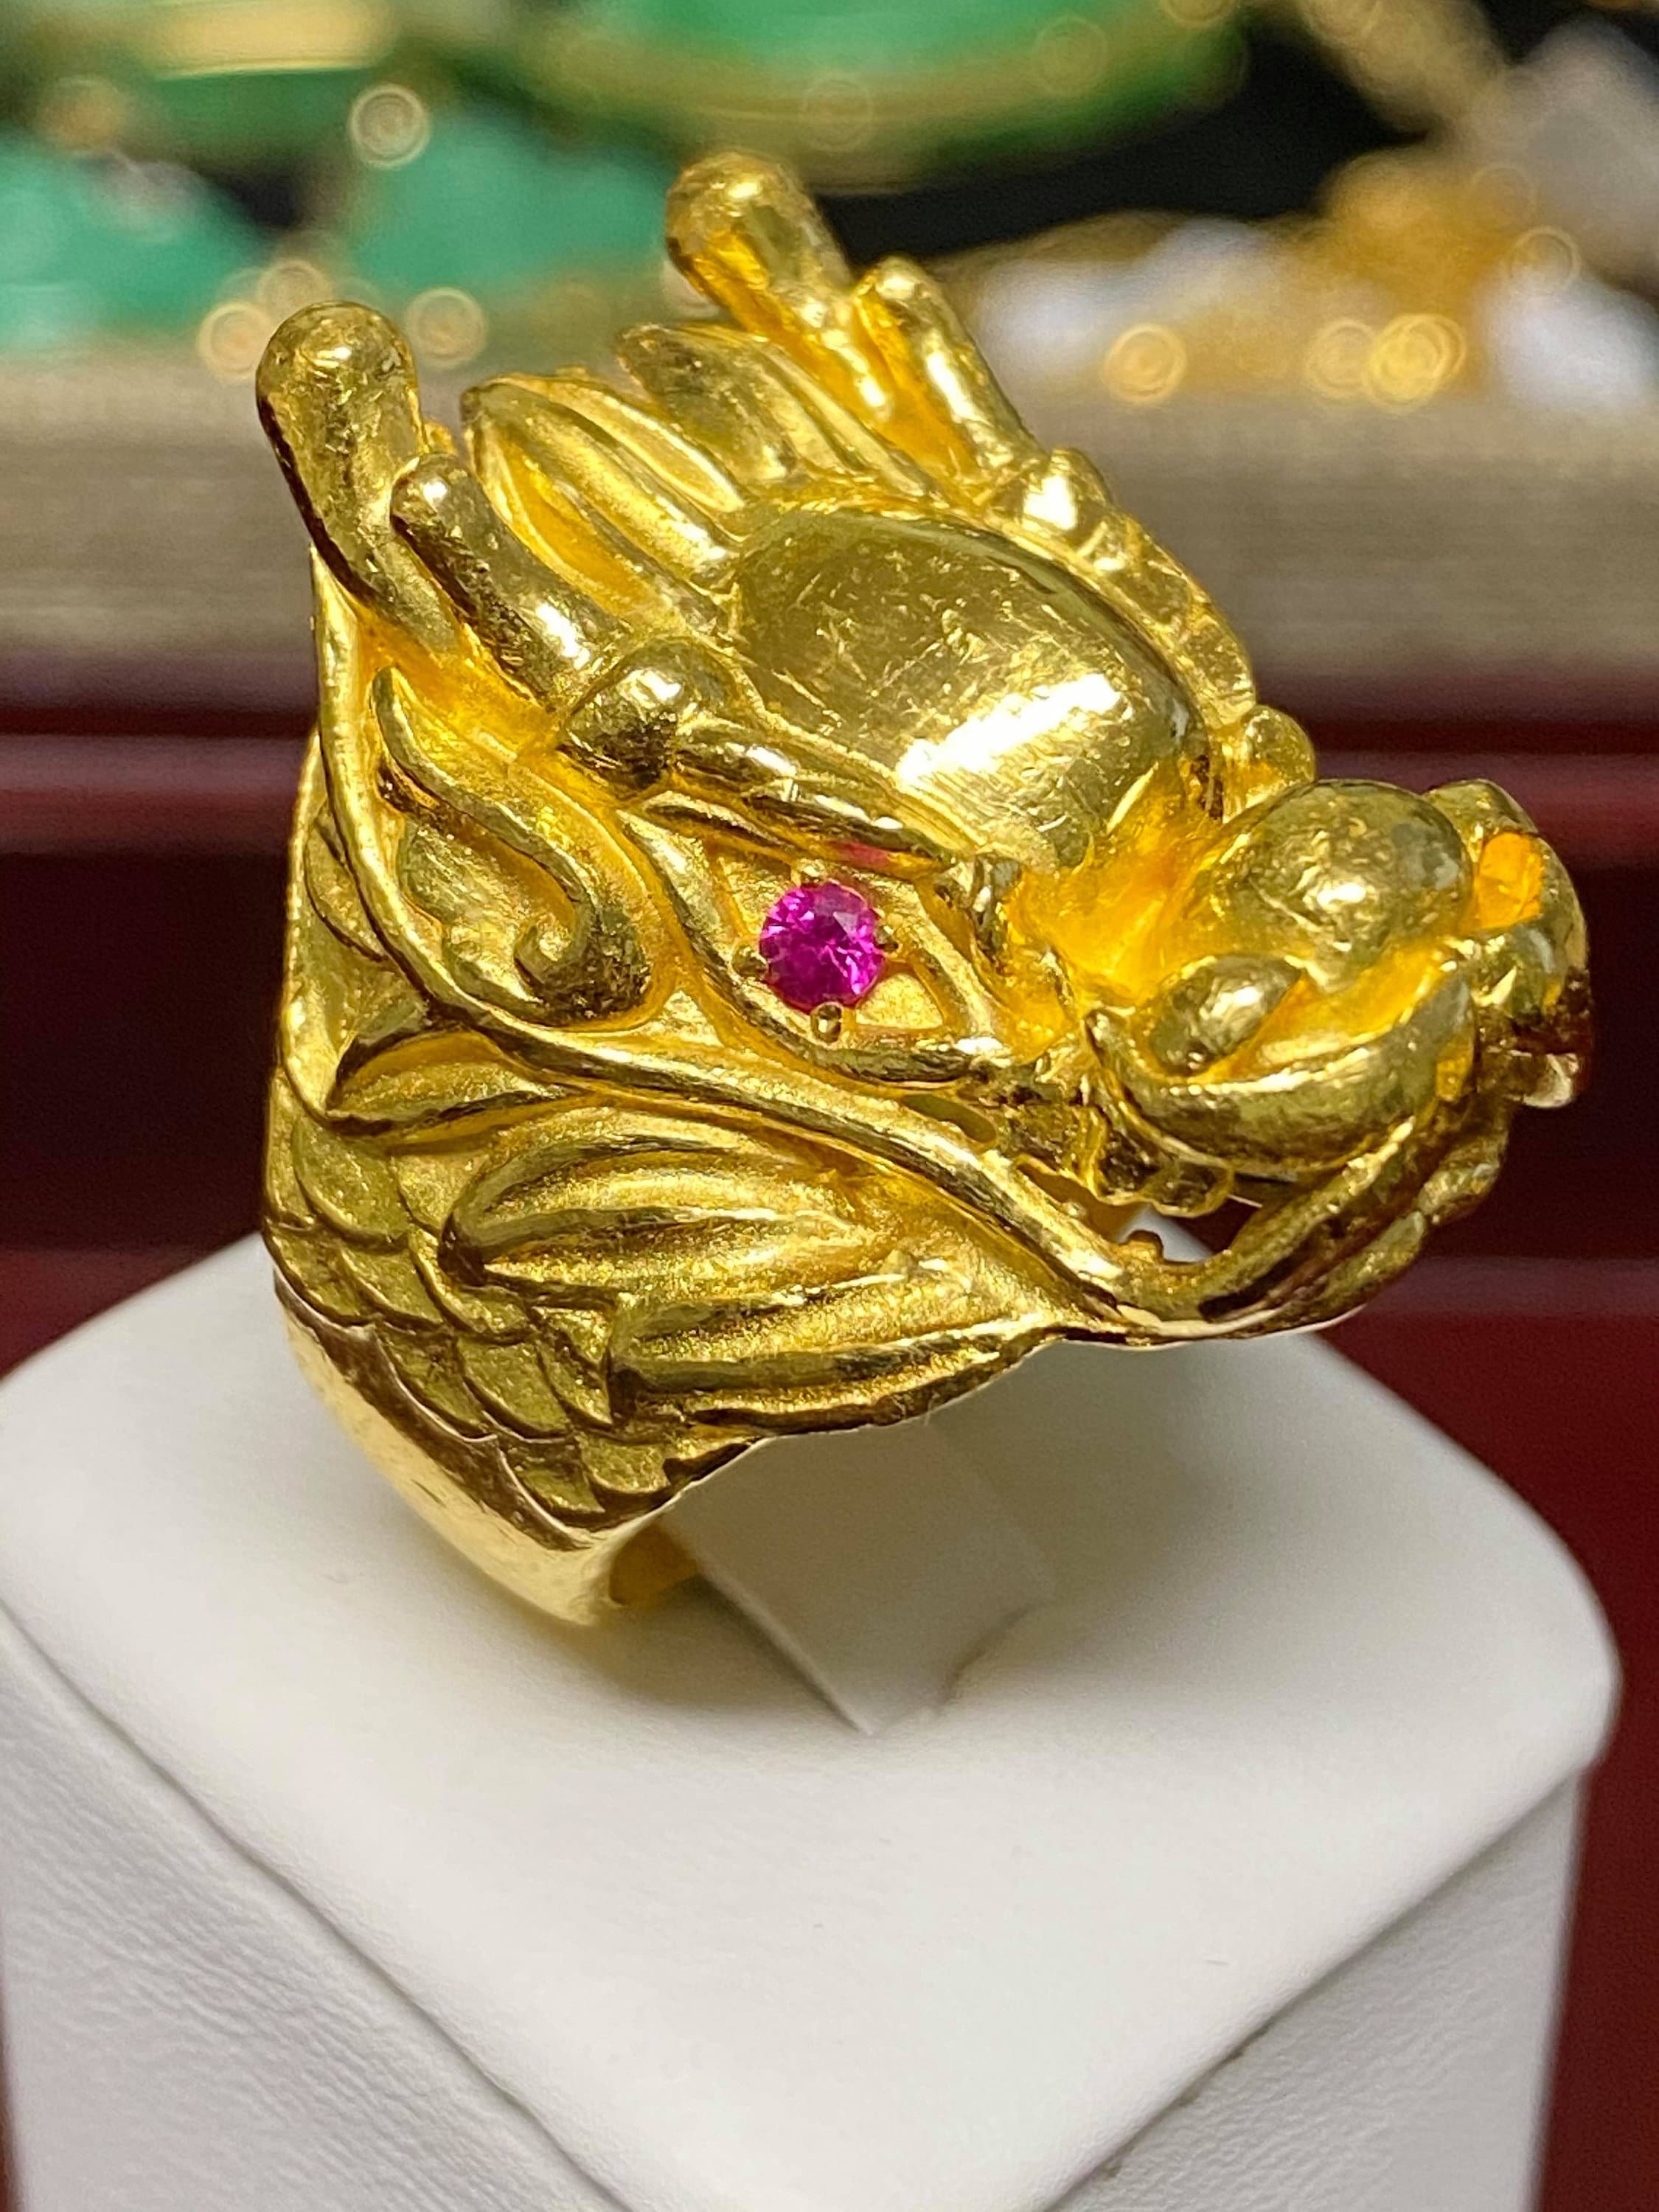 14k Rose Gold Dragon Ring With Rubies And An Opal, Circa 1930 – Victorious